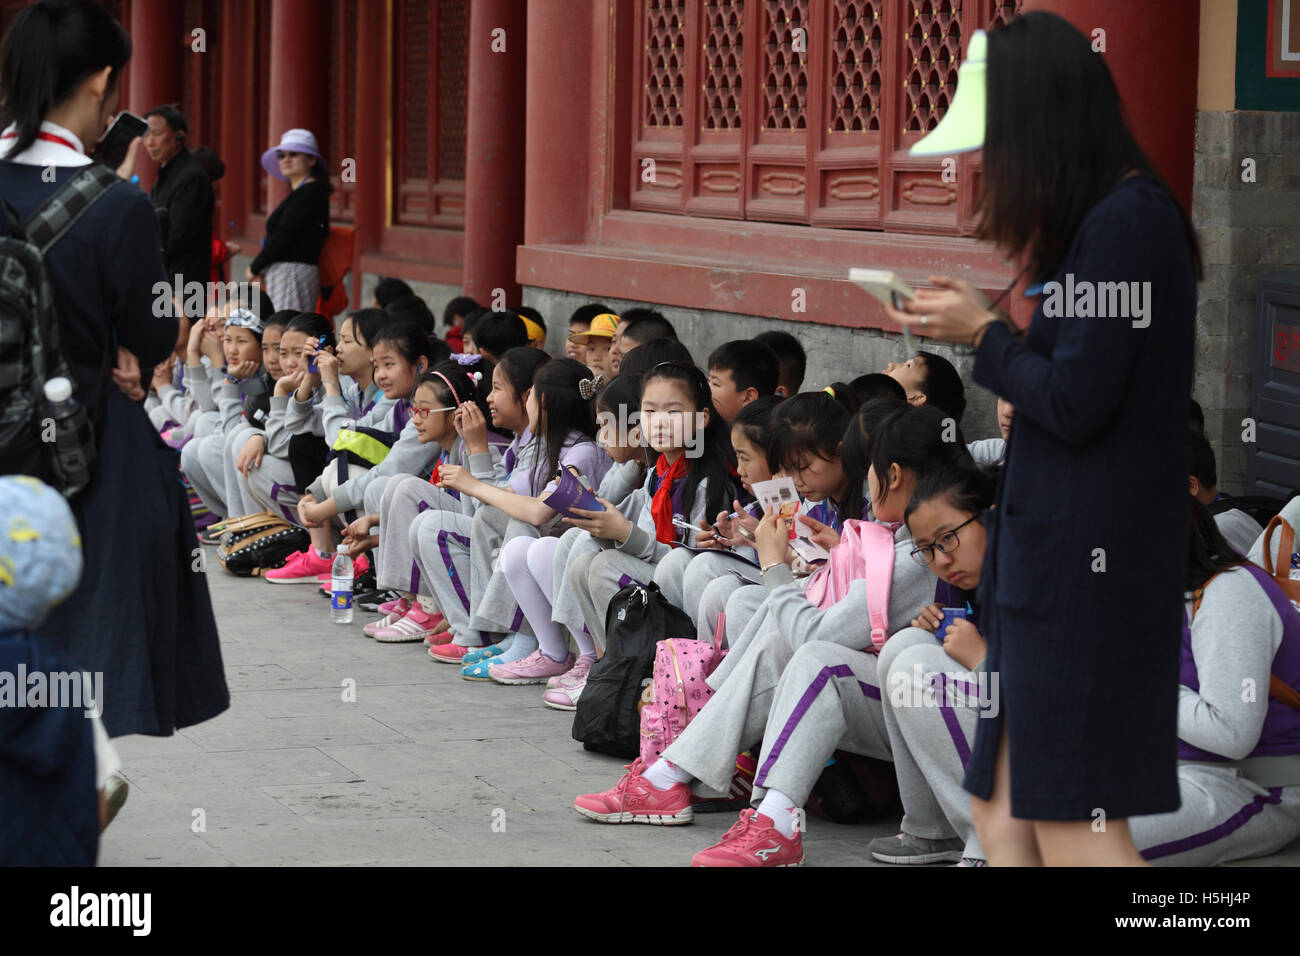 Chinese children, pupils, wearing school uniform, sit on the ground obediently while on a Heritage outing with their teachers. Stock Photo